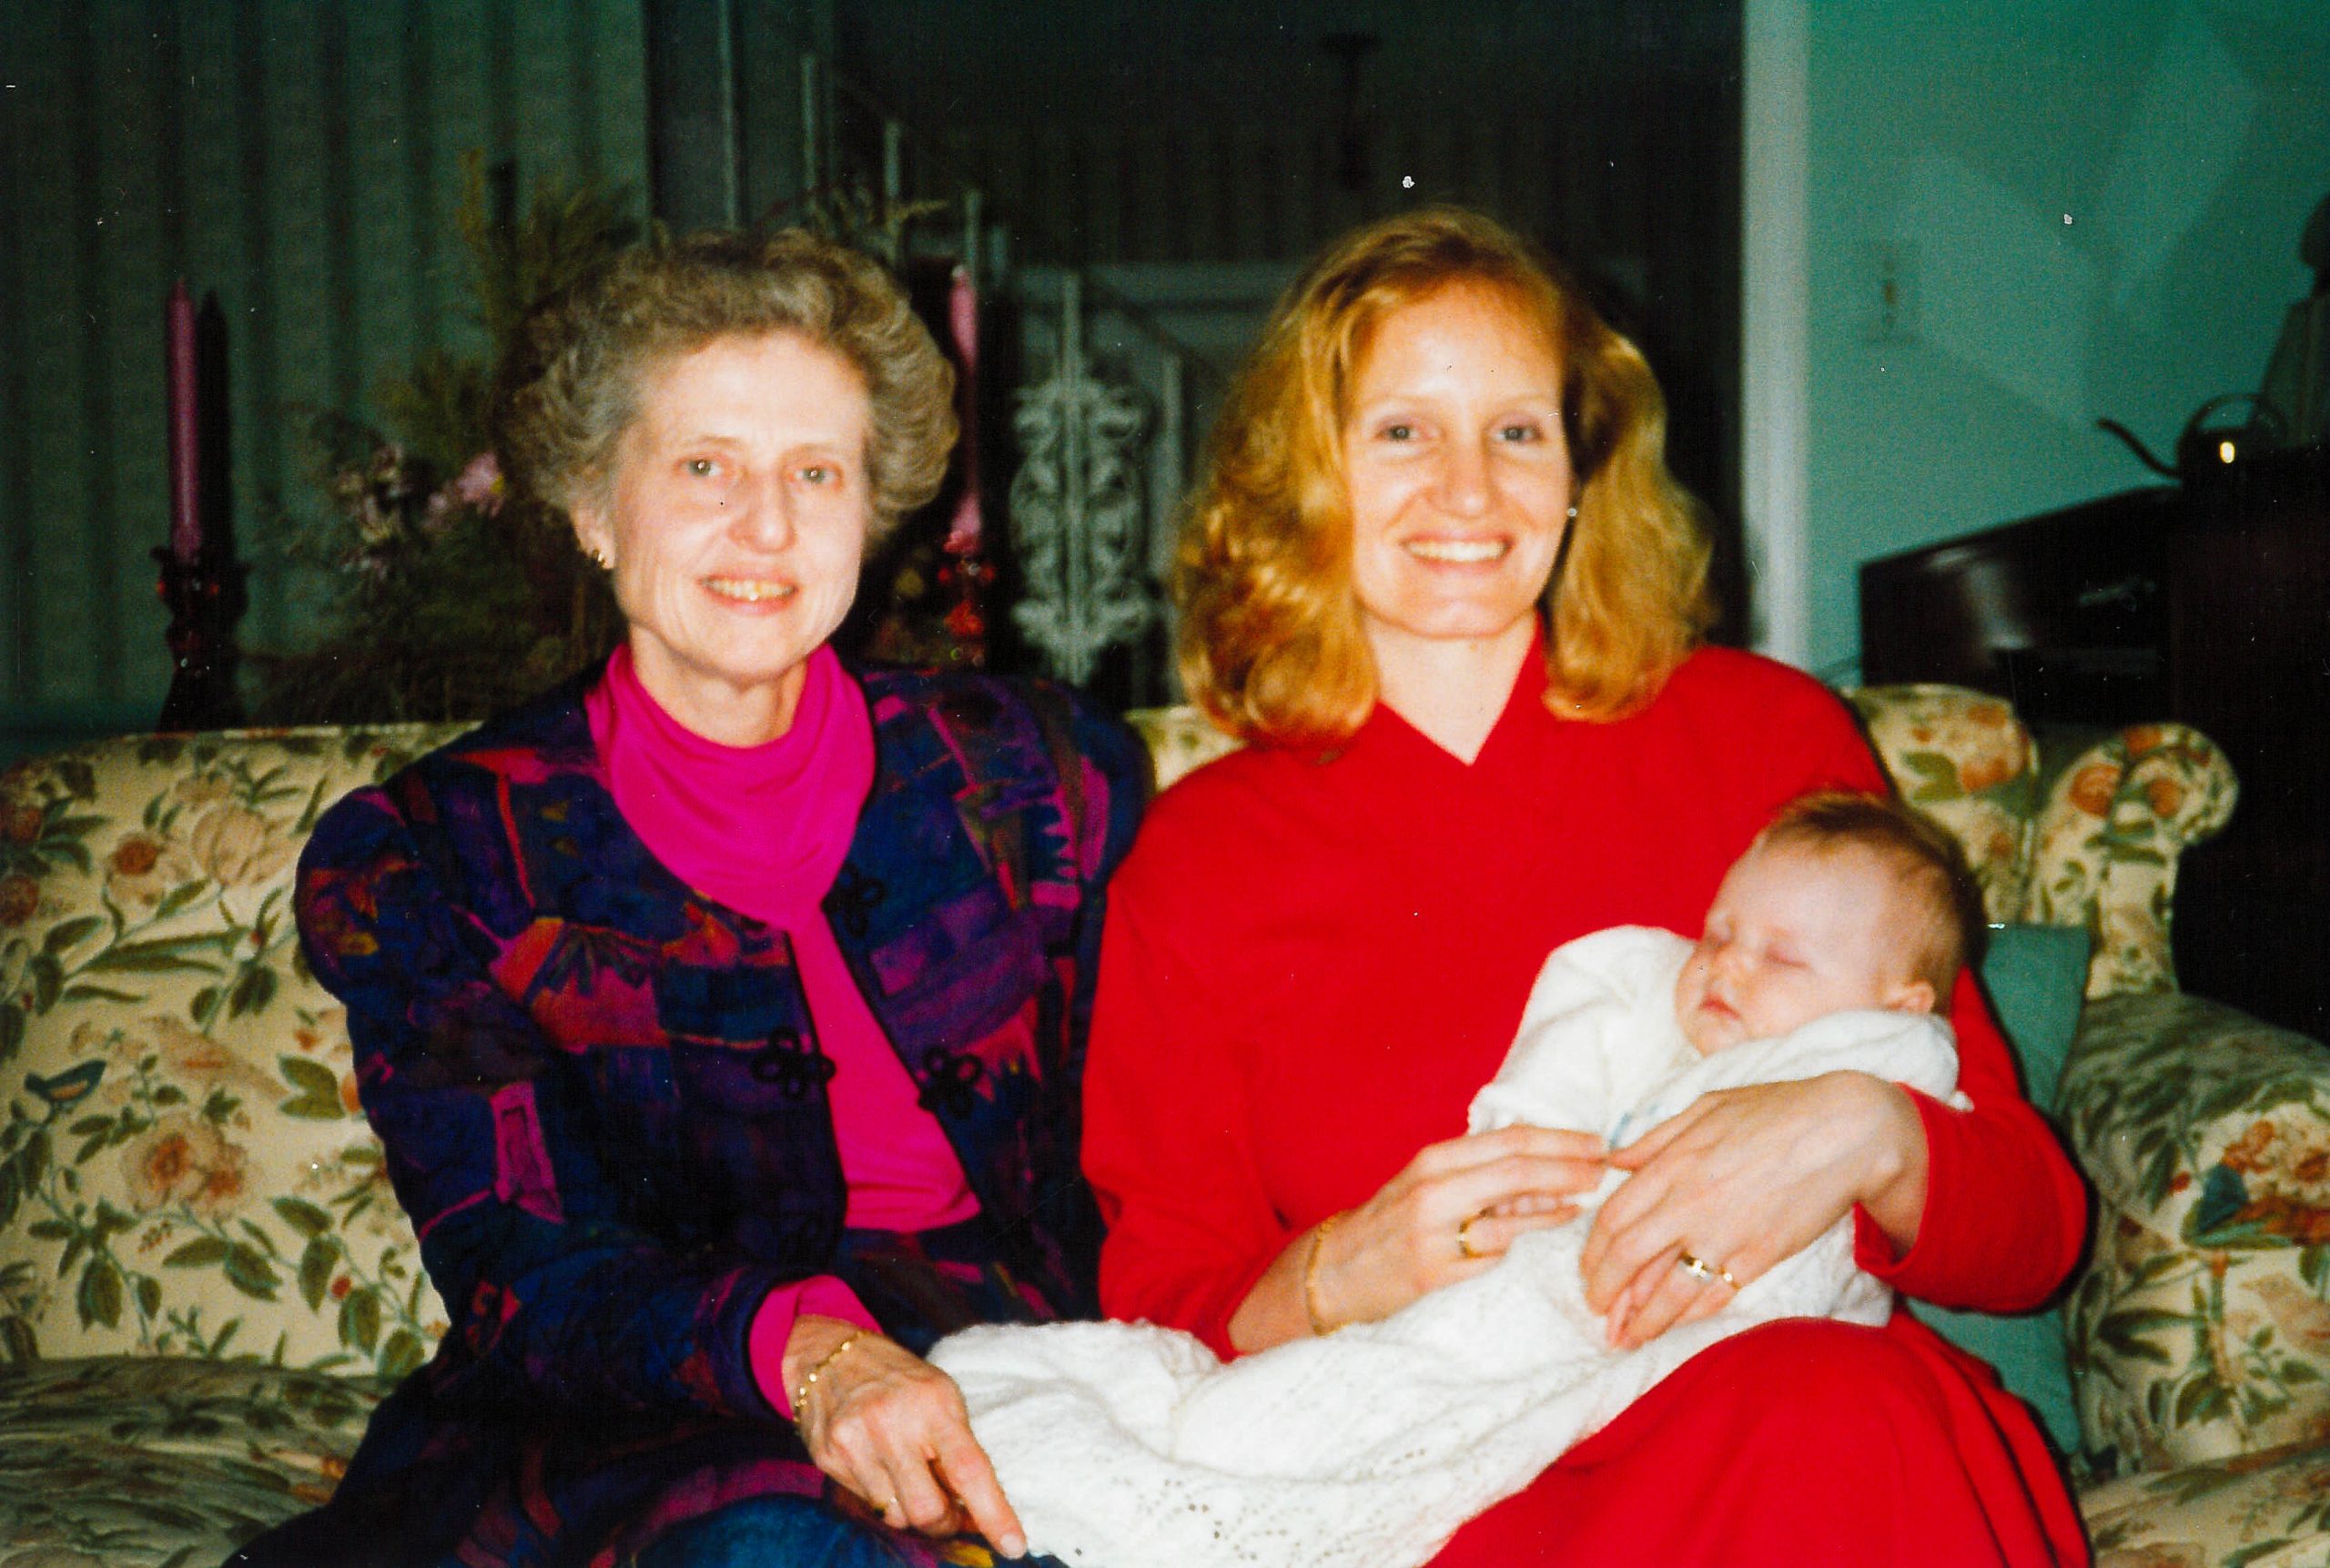 Sister Kay with her niece Kathy and infant John at John’s christening in 1992. Sister Kay is John’s godmother.